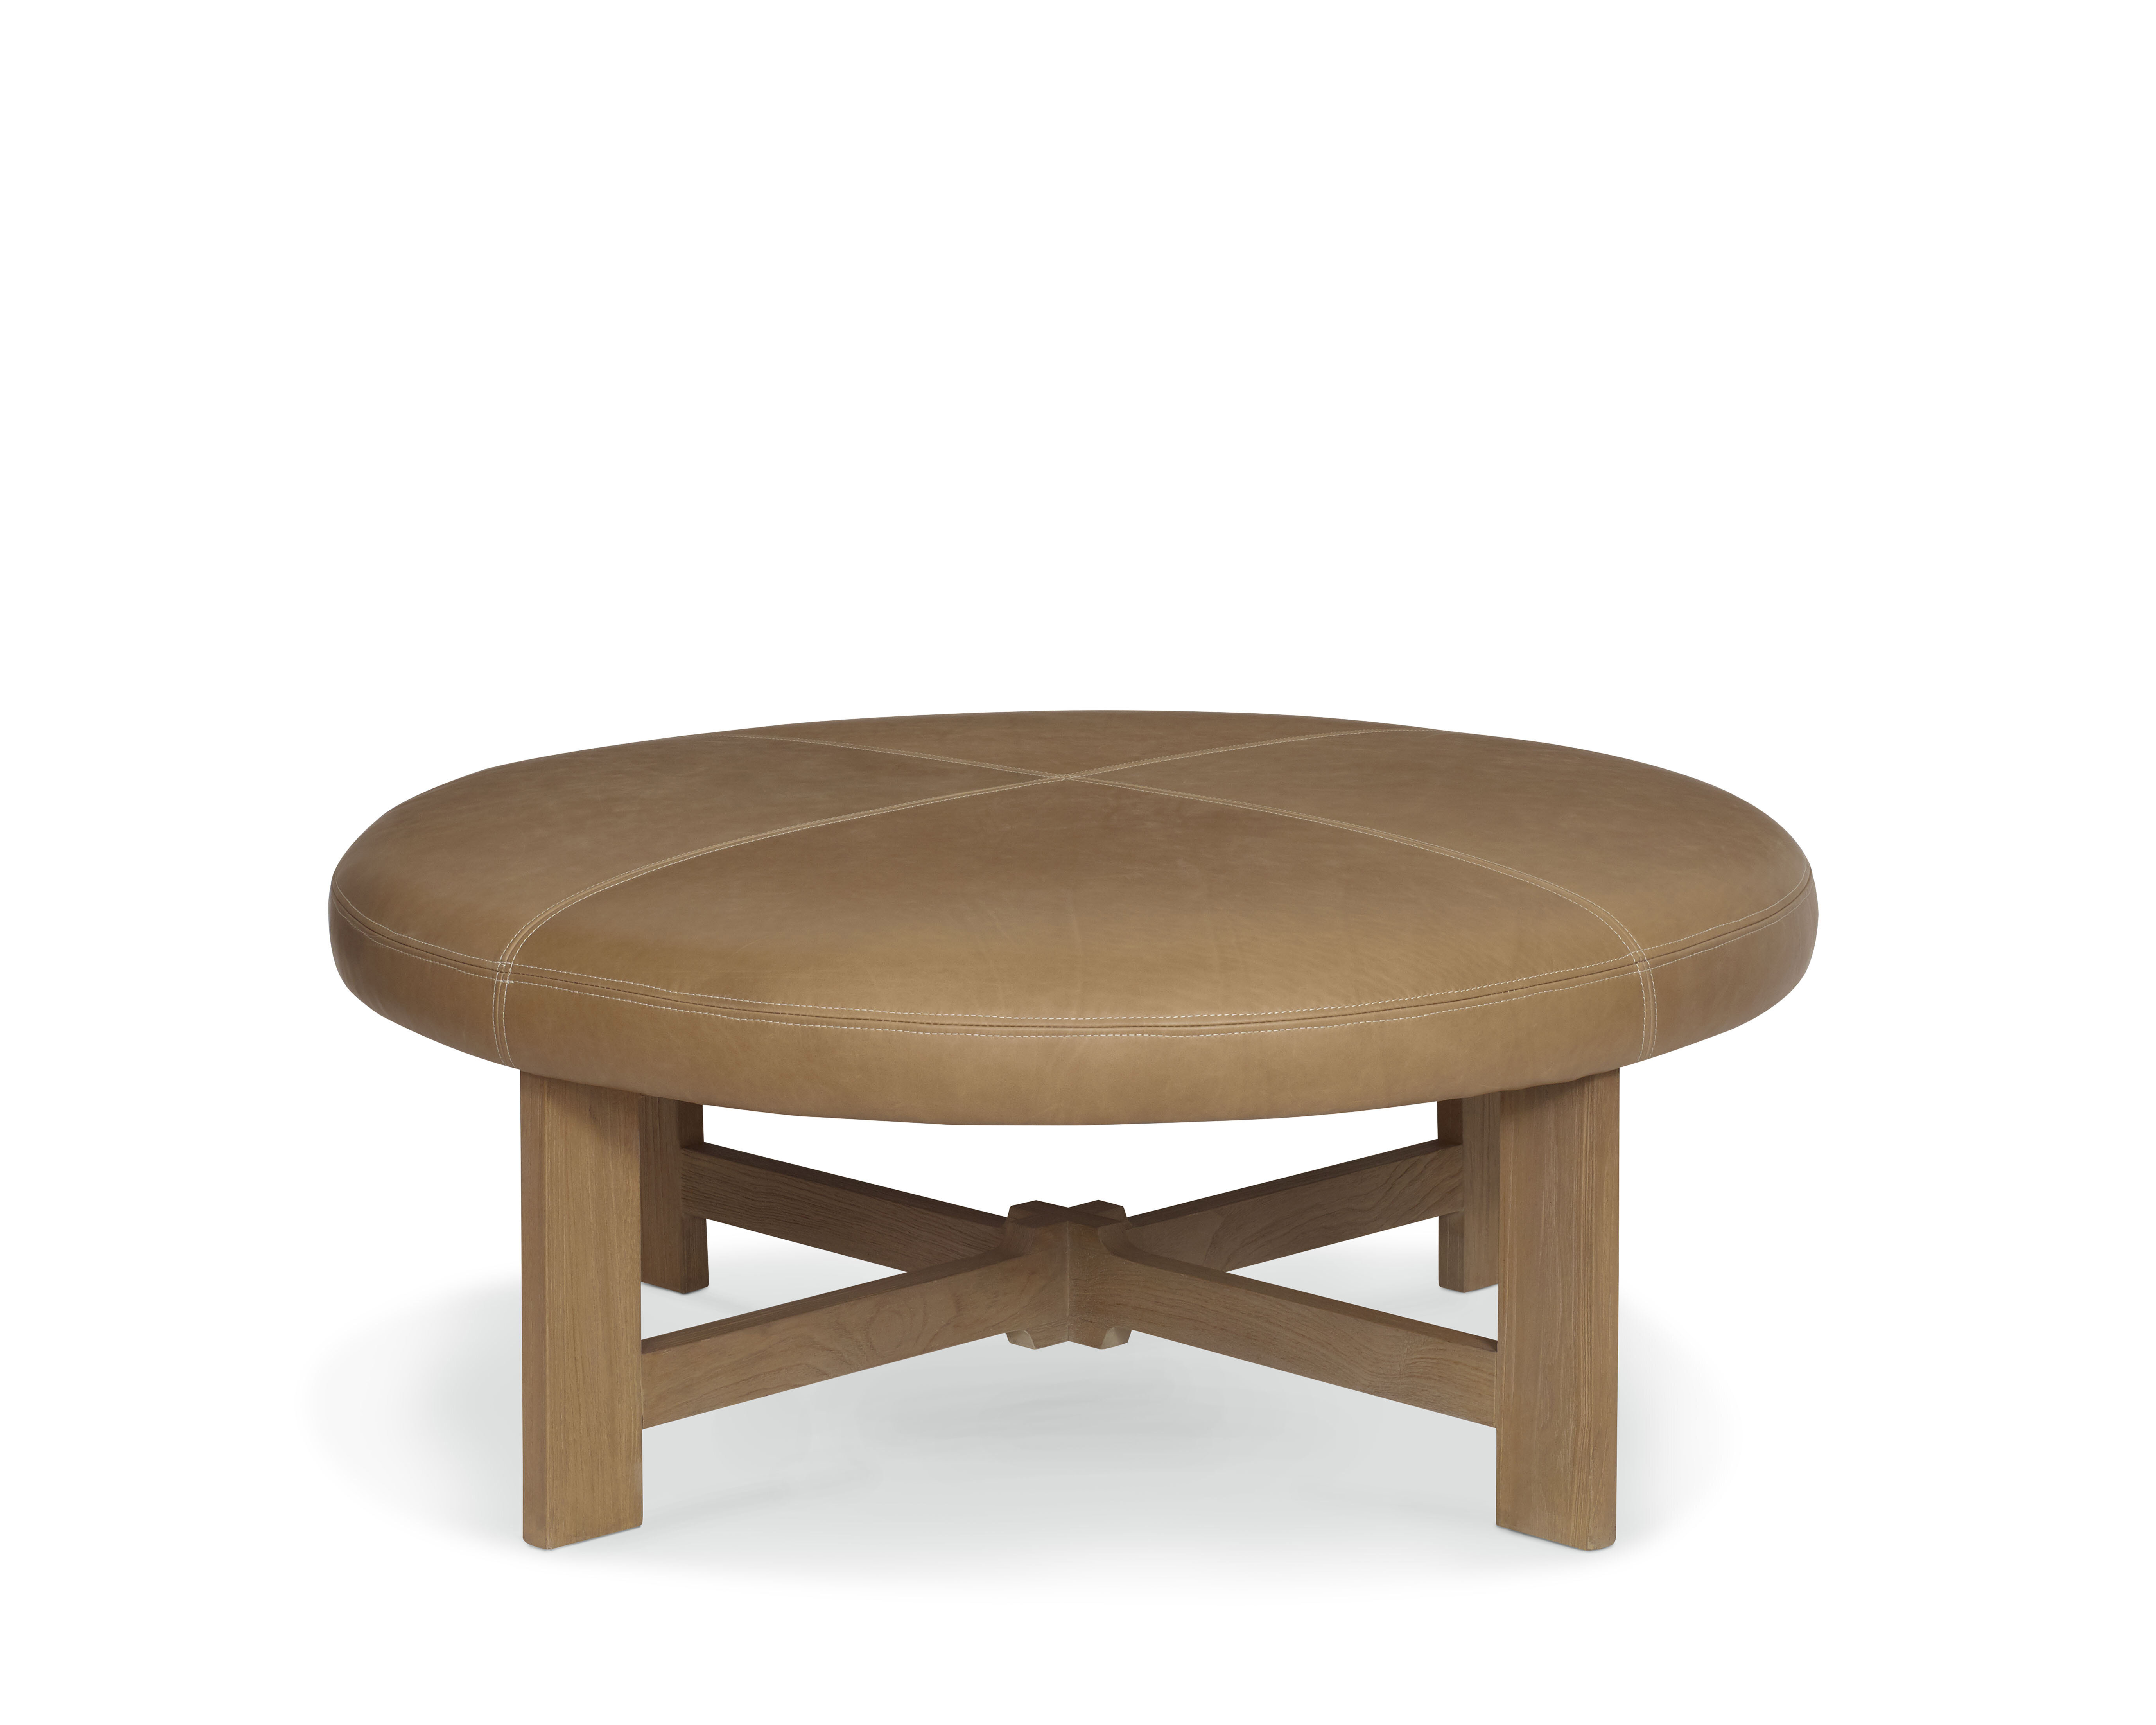 Foundry Select Mizpah 46 Genuine Leather Round Cocktail Ottoman